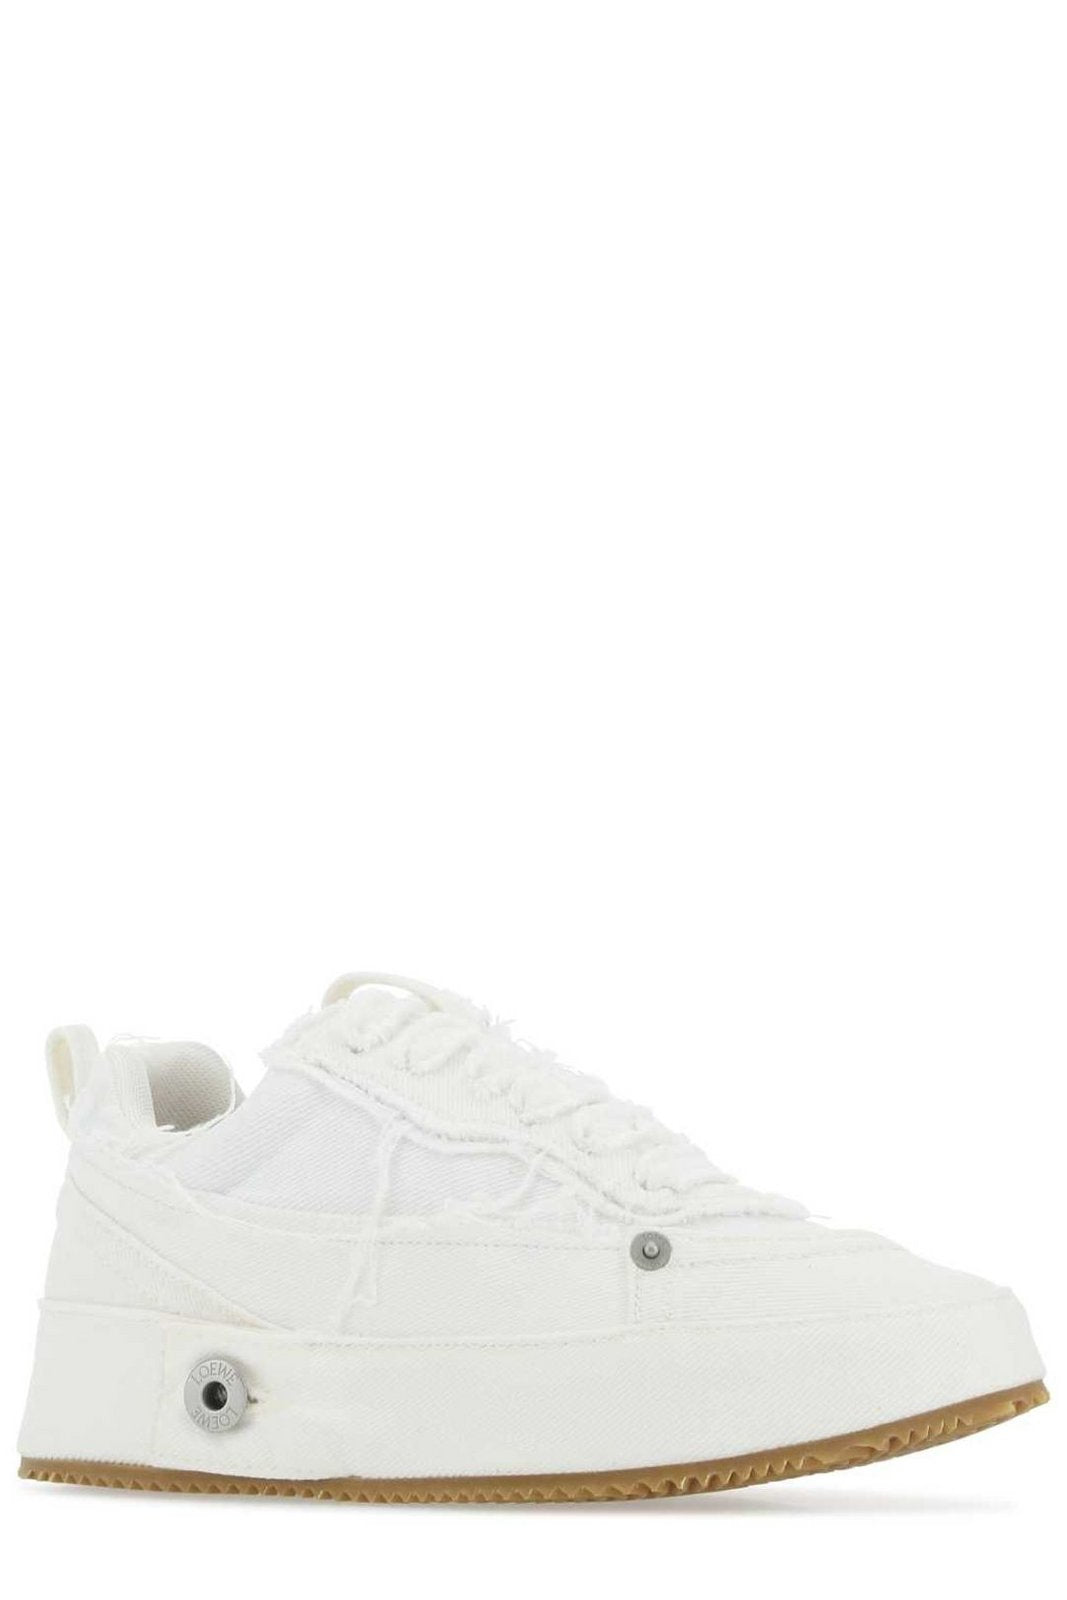 Loewe Deconstructed Lace-Up Sneakers